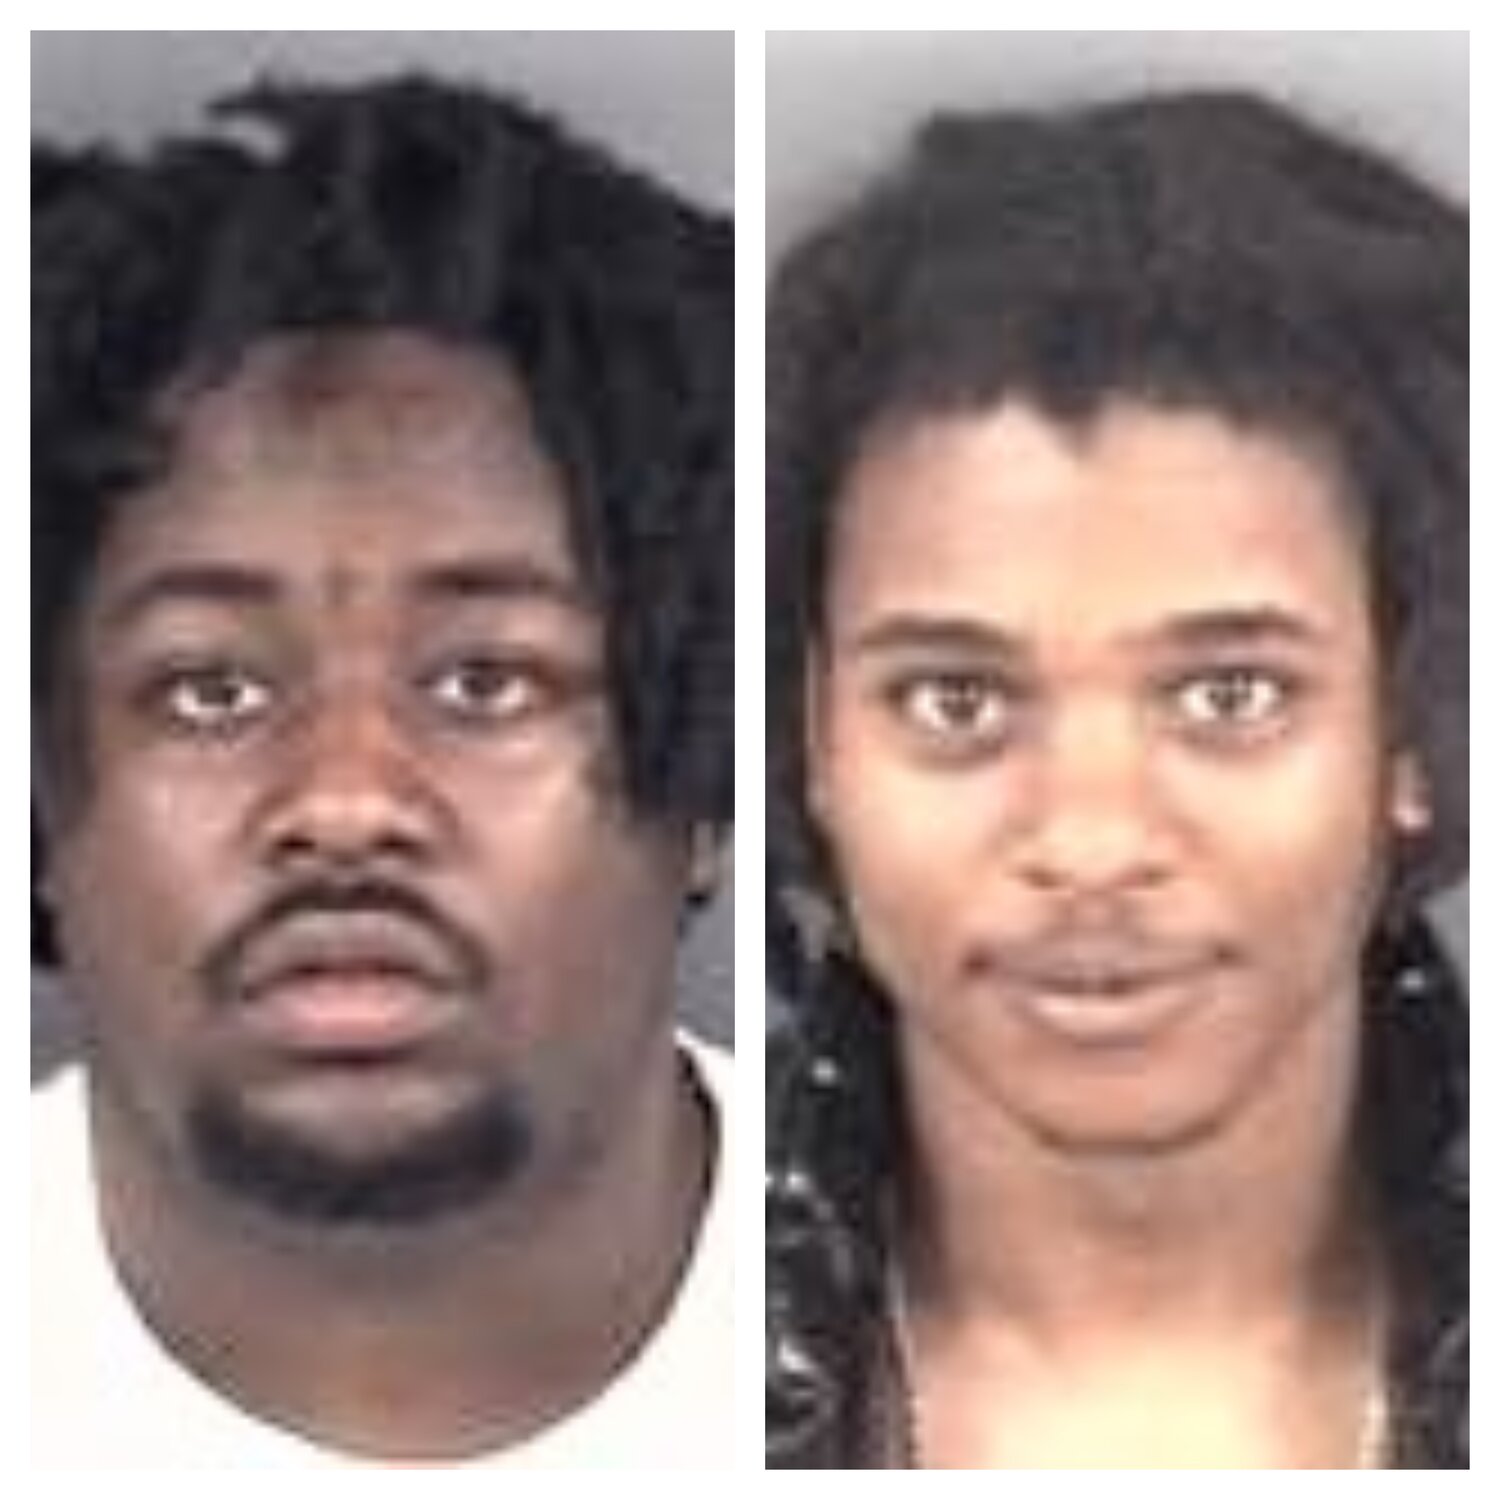 Jocephus Jones III, 21, of Fayetteville, left, and Jayquan Deshawn Blandshaw, 22, of Hope Mills, are charged with murder in the shooting death of a woman on April 1i7 in  Hope Mills.